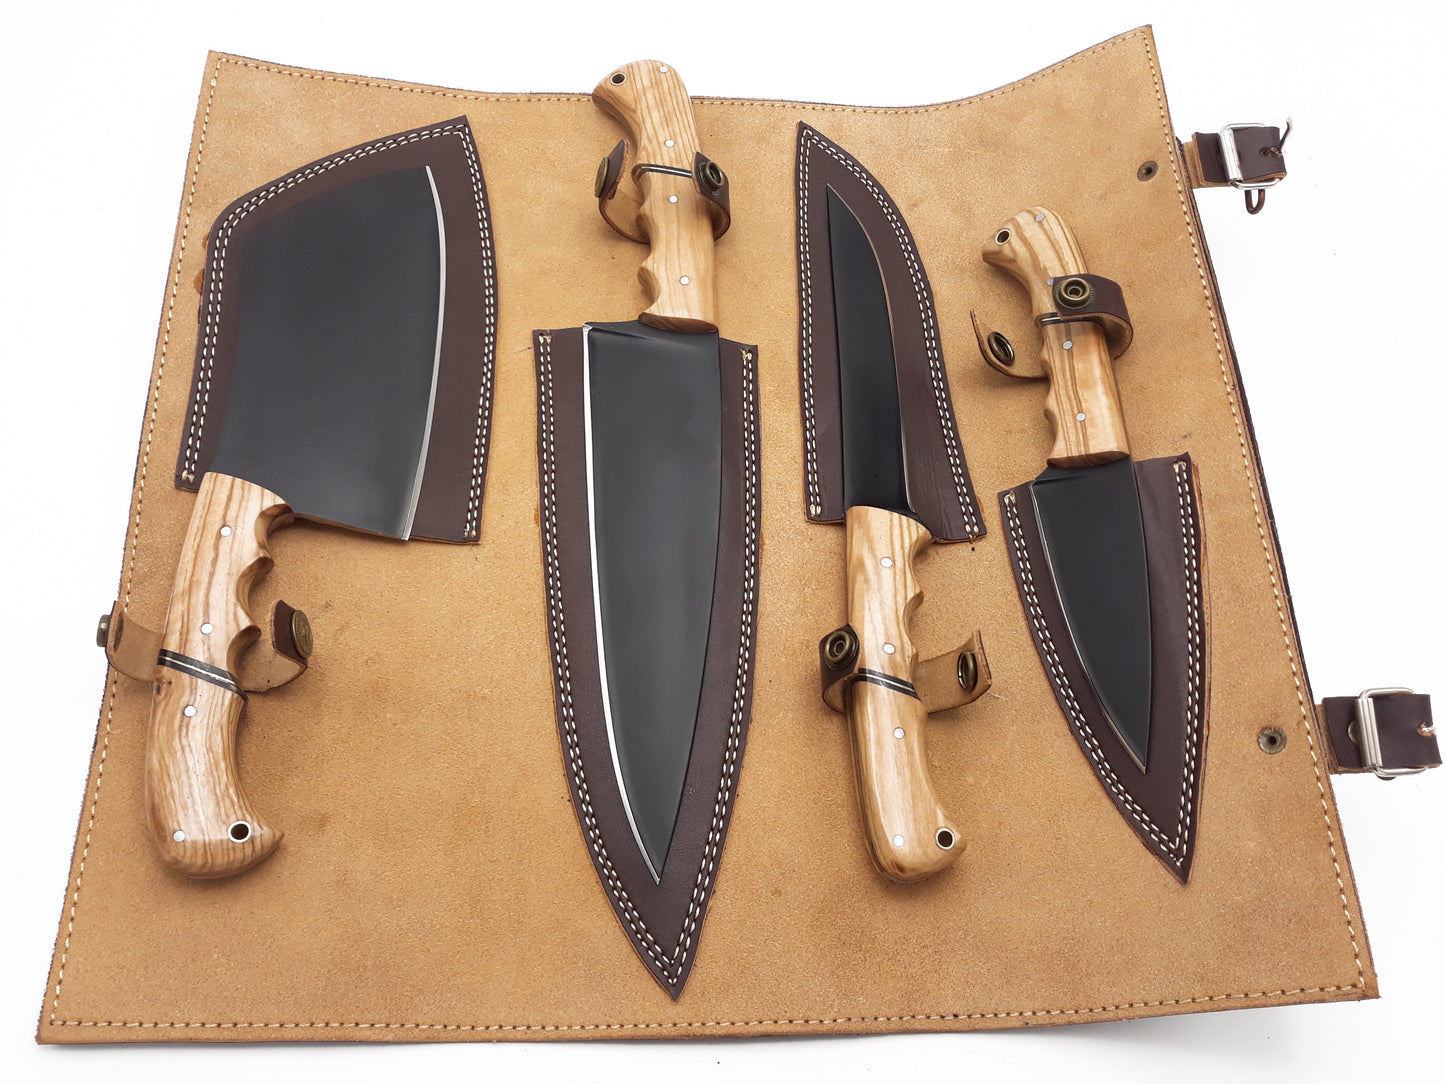 Elegant 4-Piece Chef Knife Set with Olive Wood Handle and Ultra-Sharp High Carbon Steel Blades - Ideal for Professional and Home Cooking"